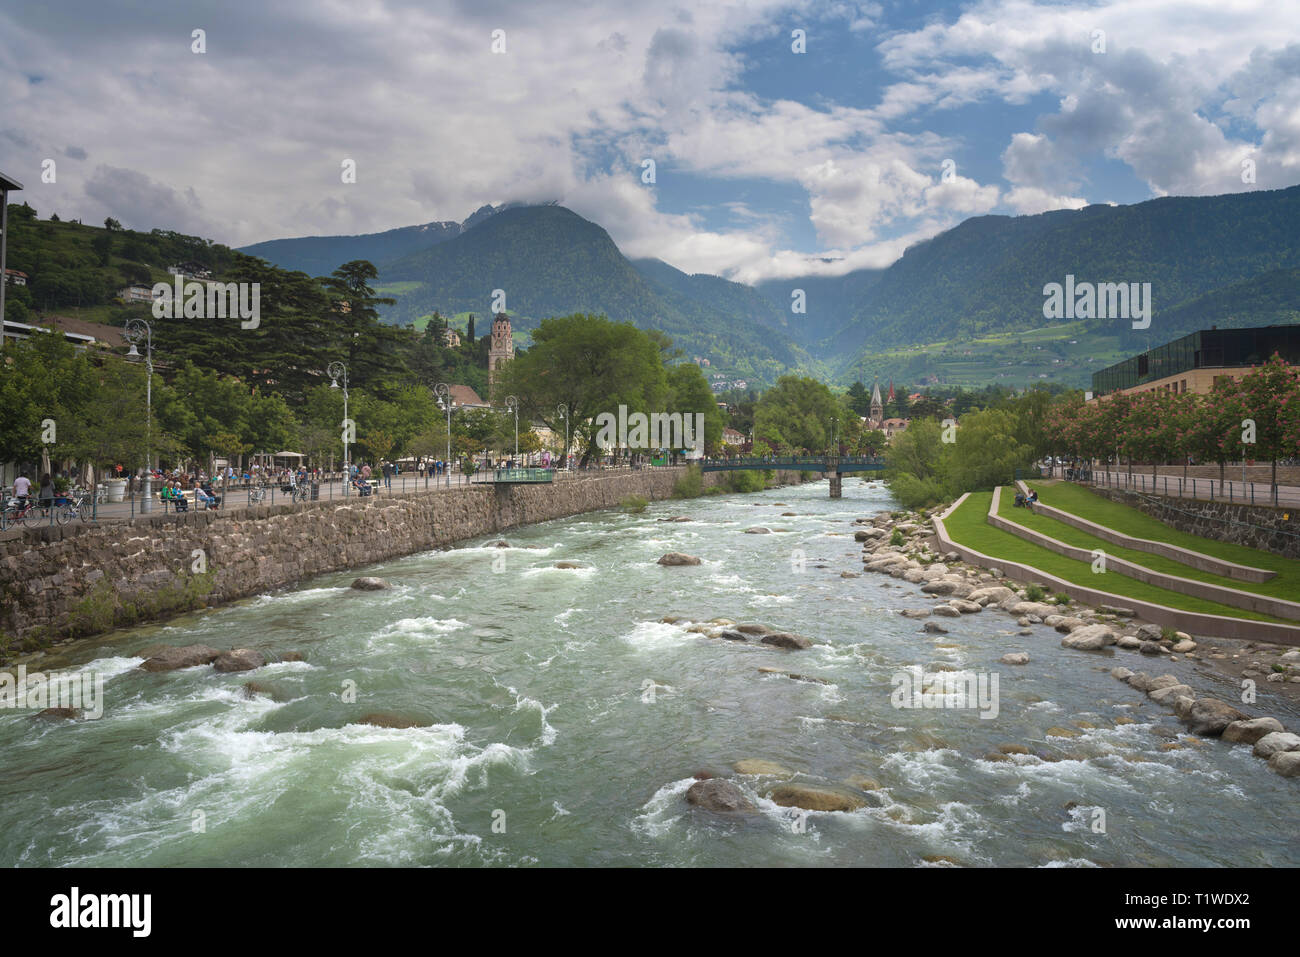 Merano in South Tyrol, a beautiful city of Trentino Alto Adige, View on the famous promenade along the Passirio river. Northern Italy Stock Photo